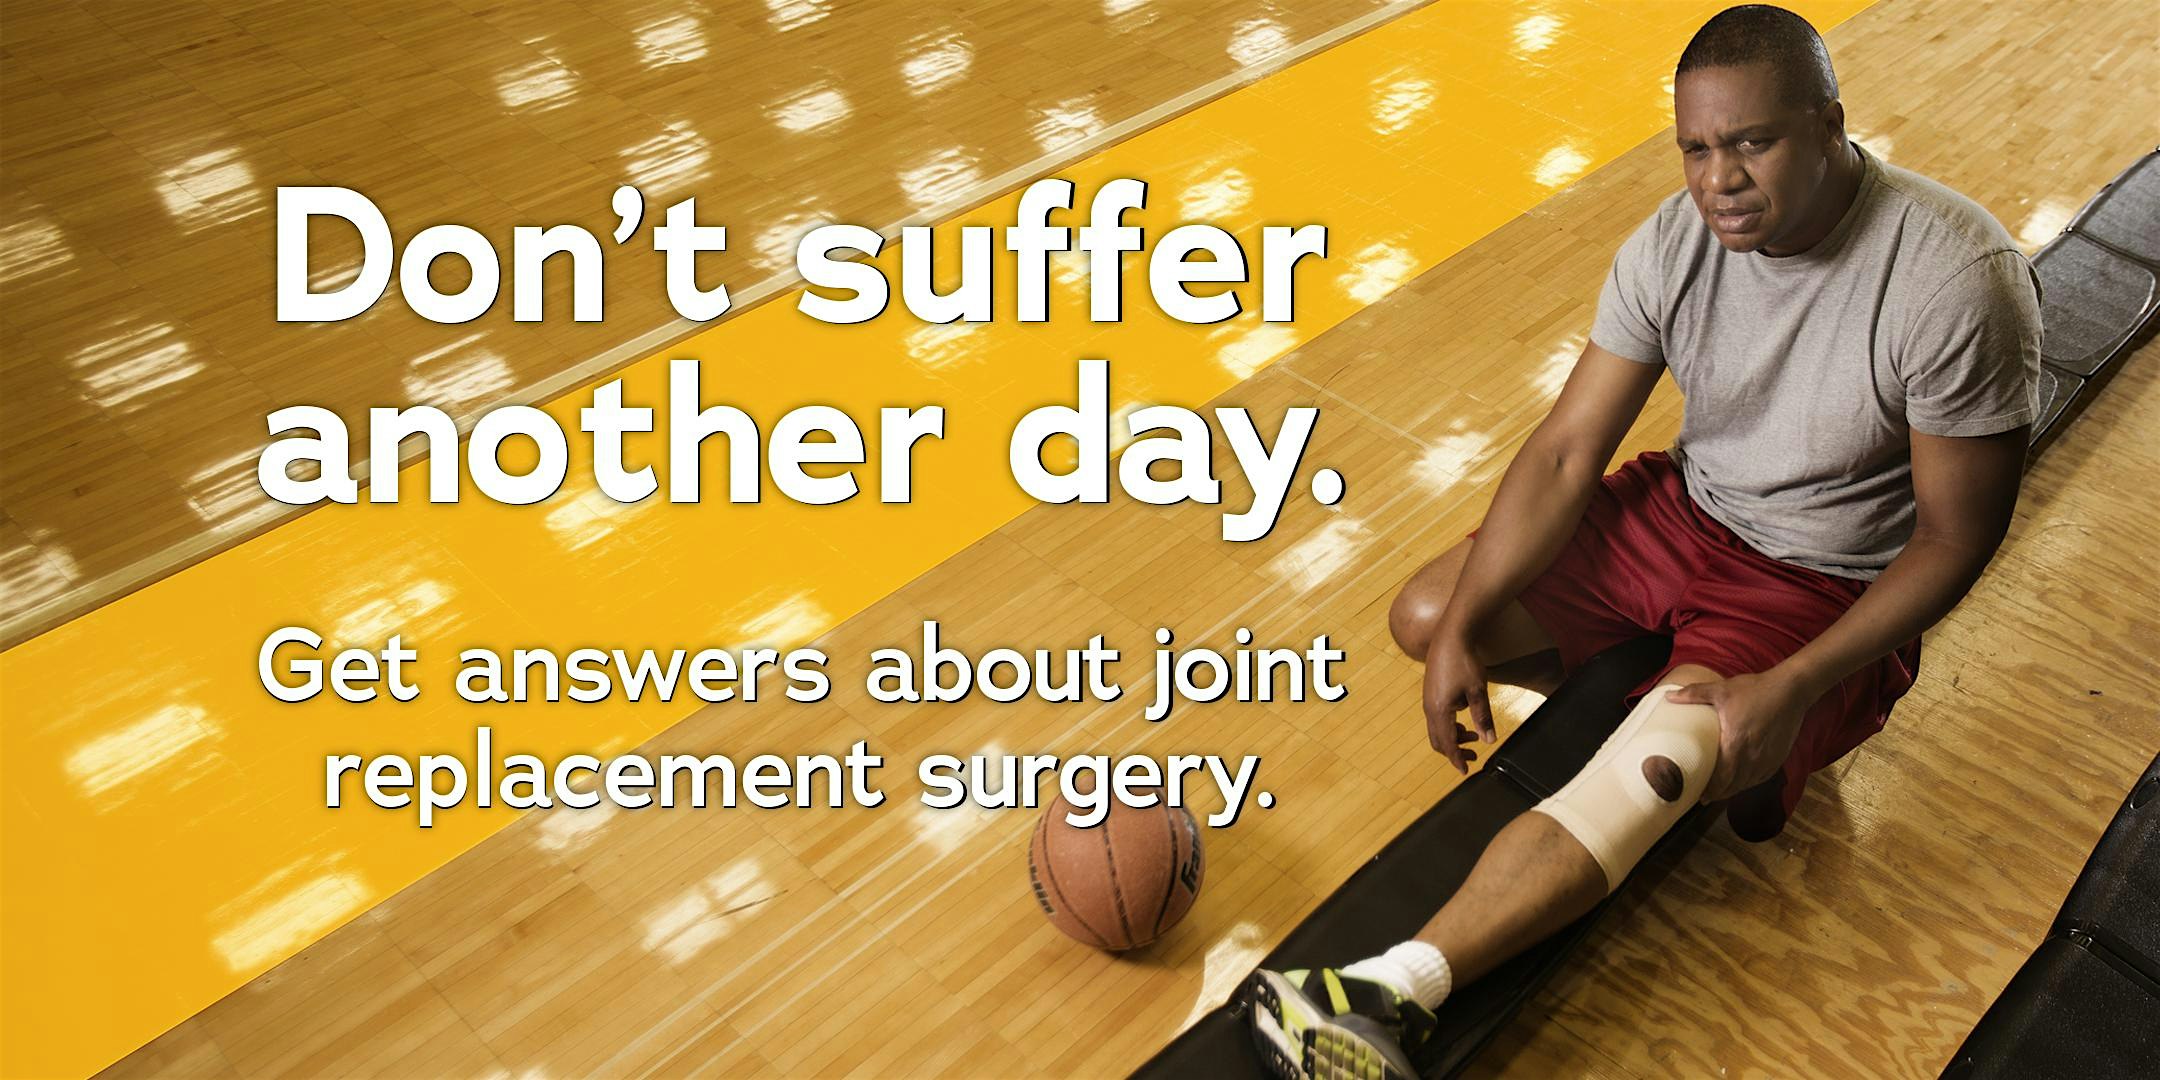 Free Knee Replacement, Shoulder, and Hand Surgery Seminar - June 11